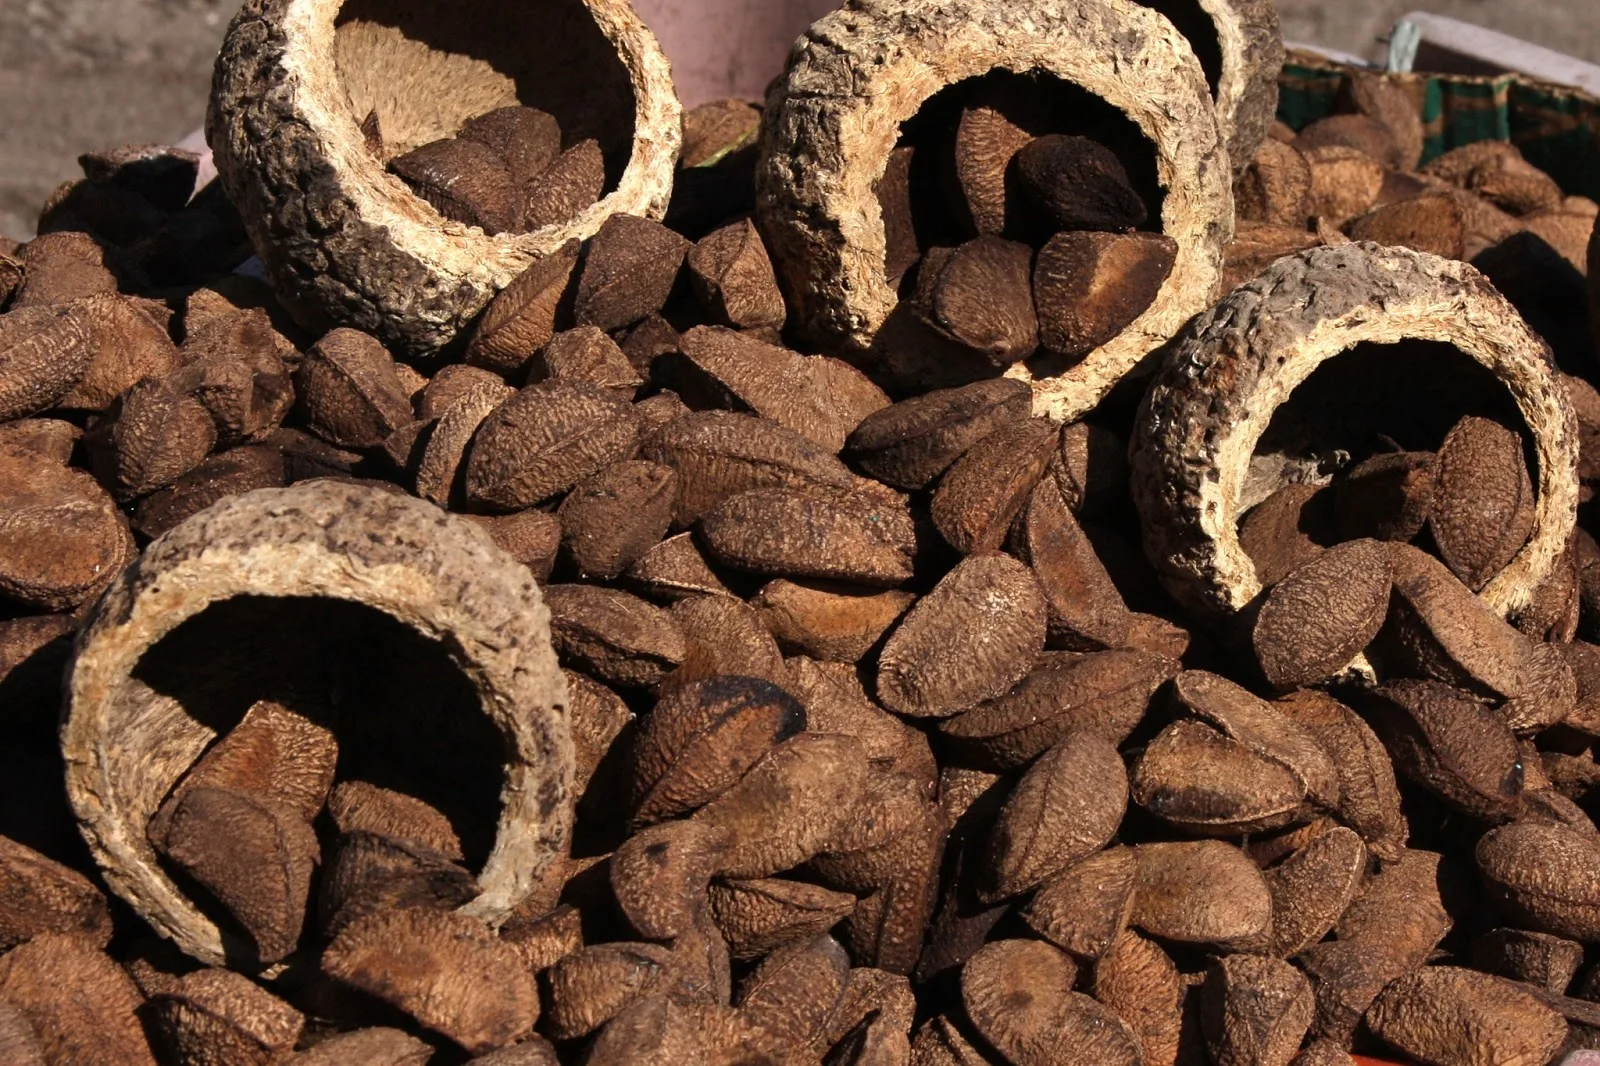 Pure Original Quality 100% Natural Wholesale Brazil Nuts For Sale